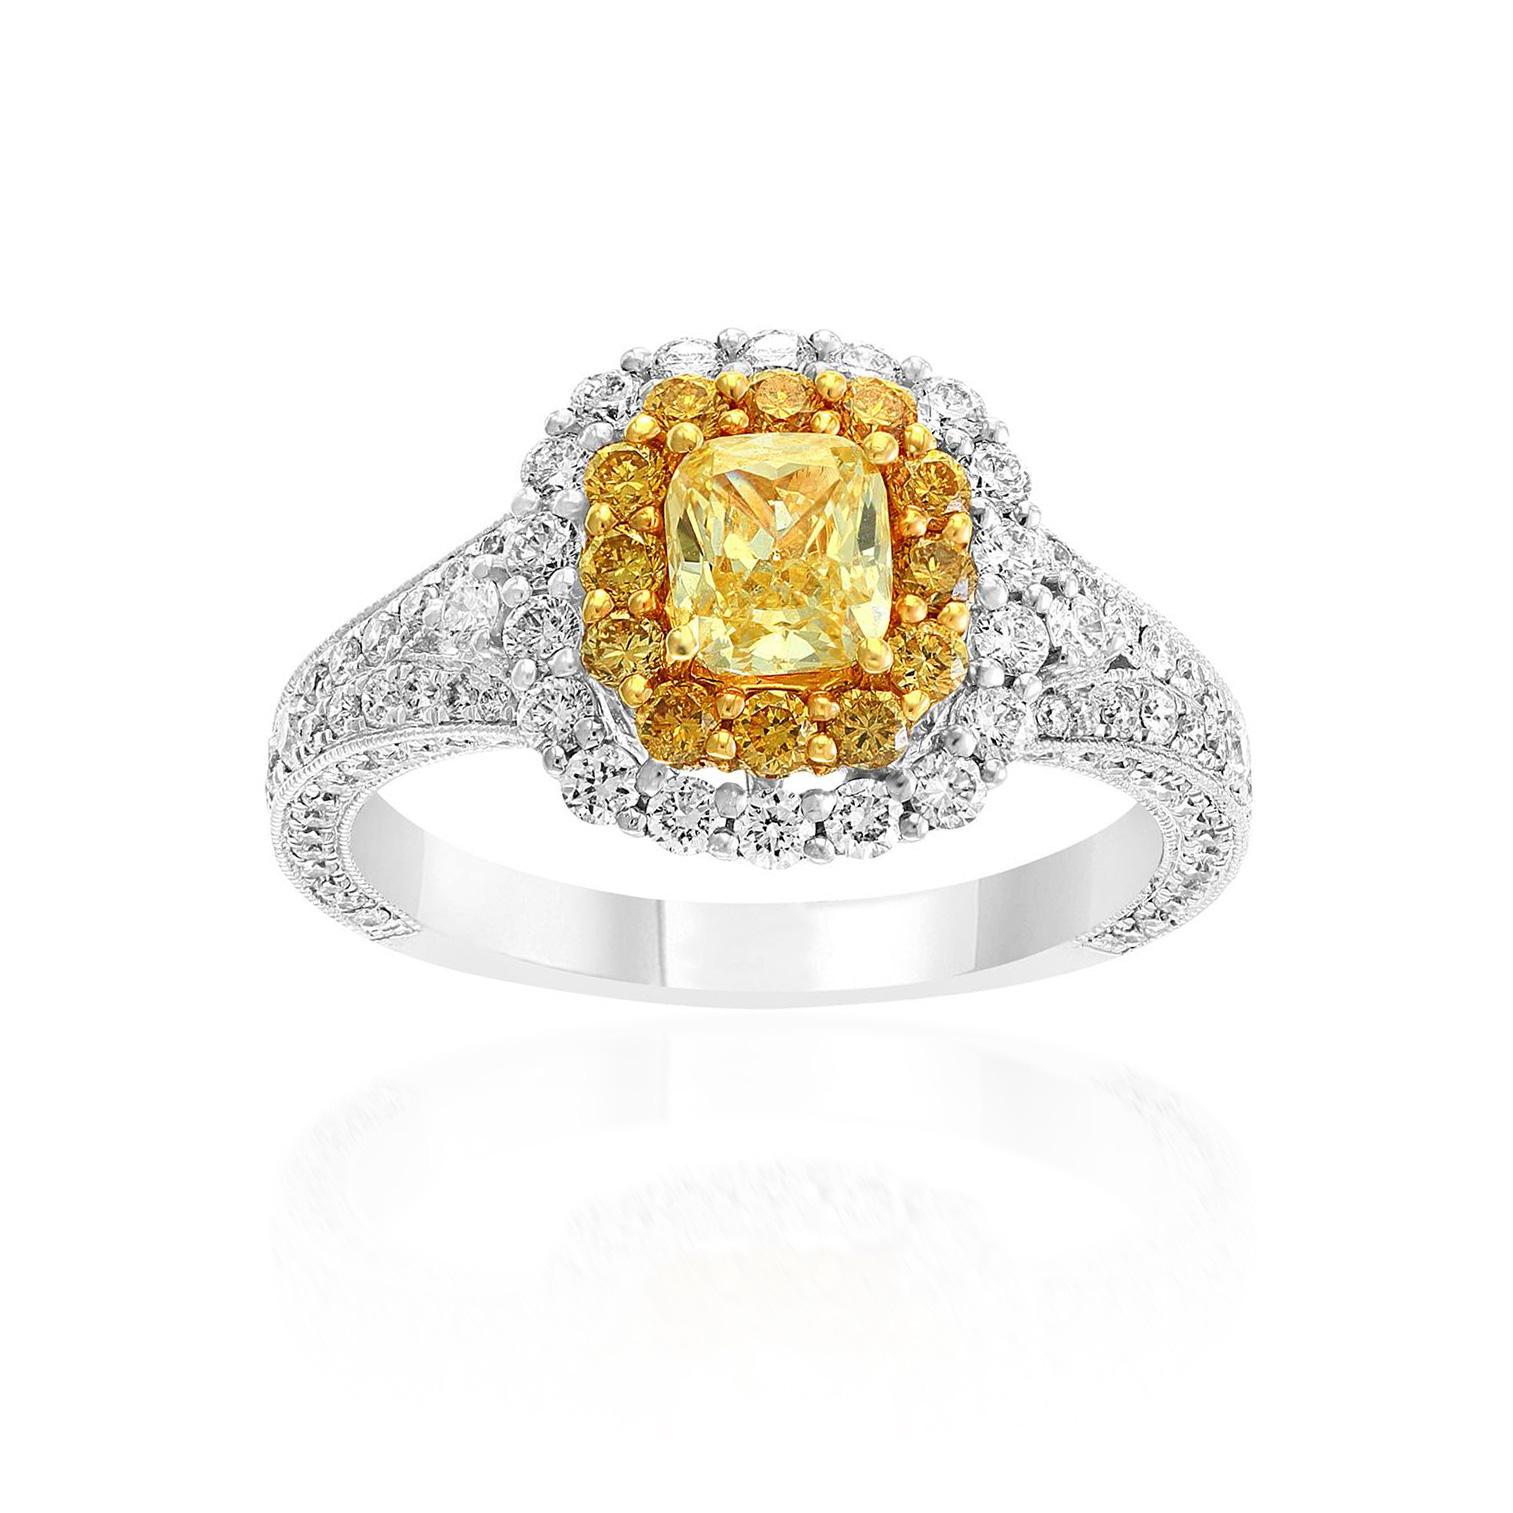 Cushion Halo Engagement Ring with 1.01 CT Fancy Yellow Center Diamond